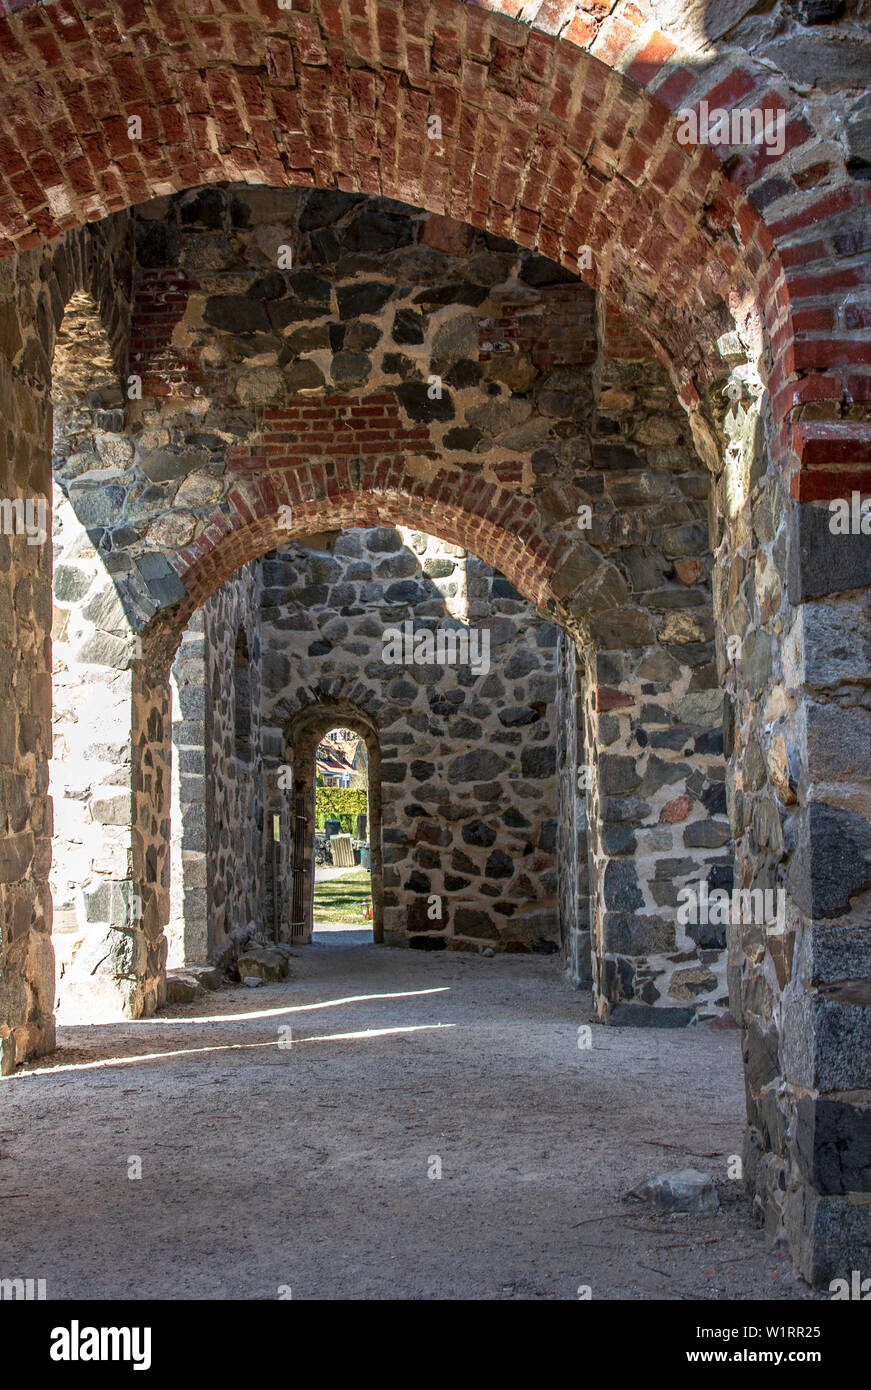 St Olaf Church ruins and surrounding graveyard in the ancient town of Sigtuna, Sweden Stock Photo